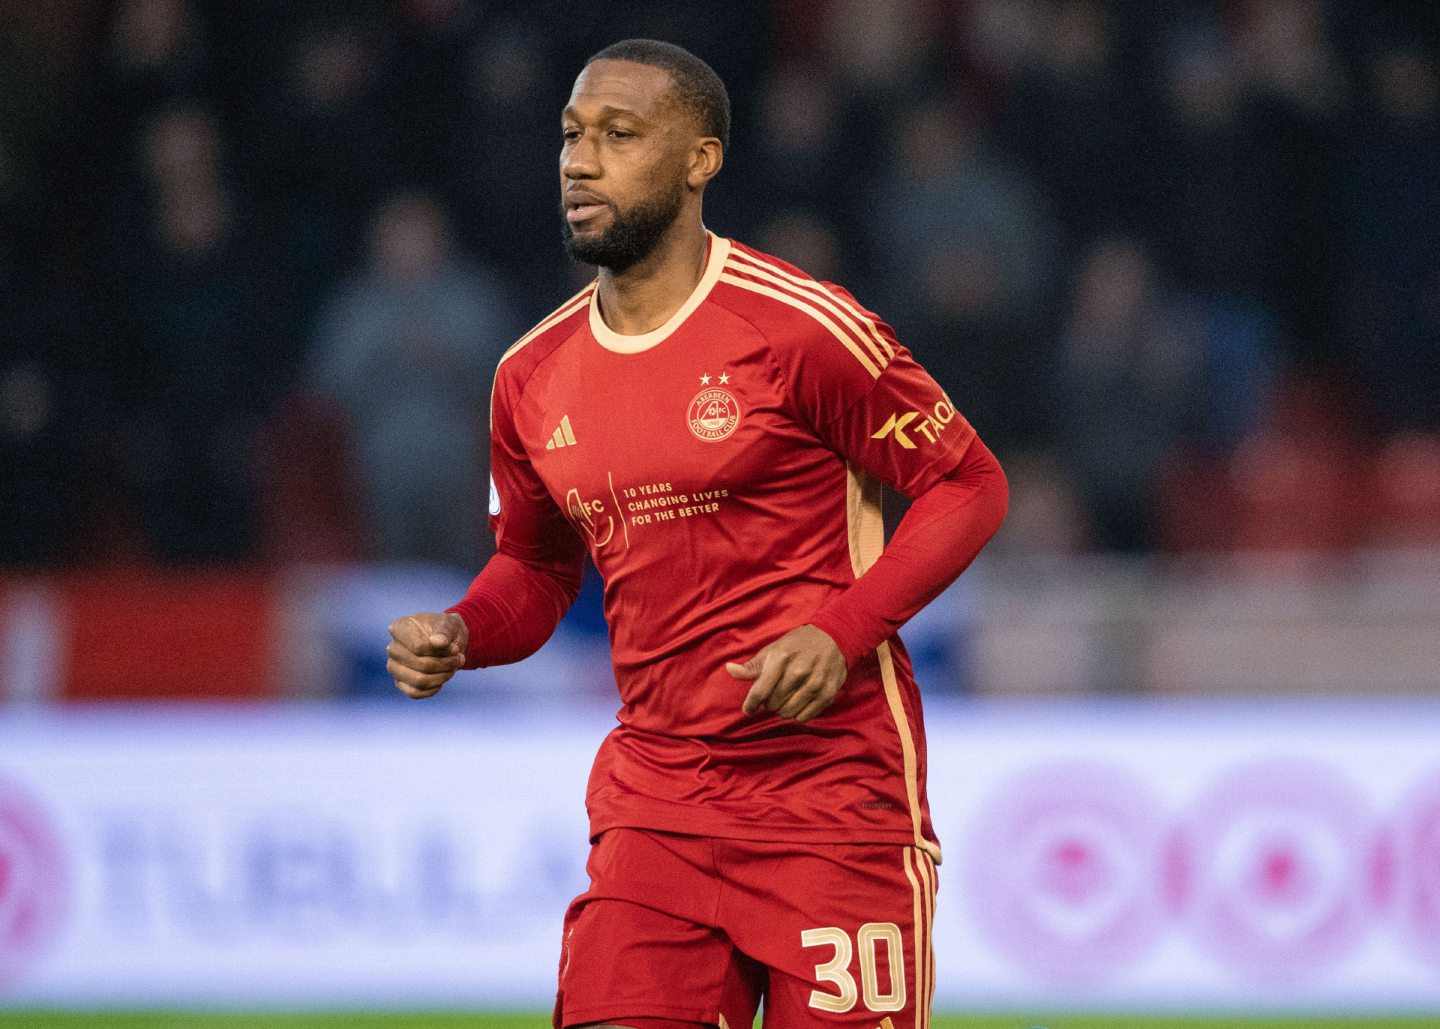 Aberdeen's Junior Hoilett makes his debut during the 2-2 draw with Hibs.